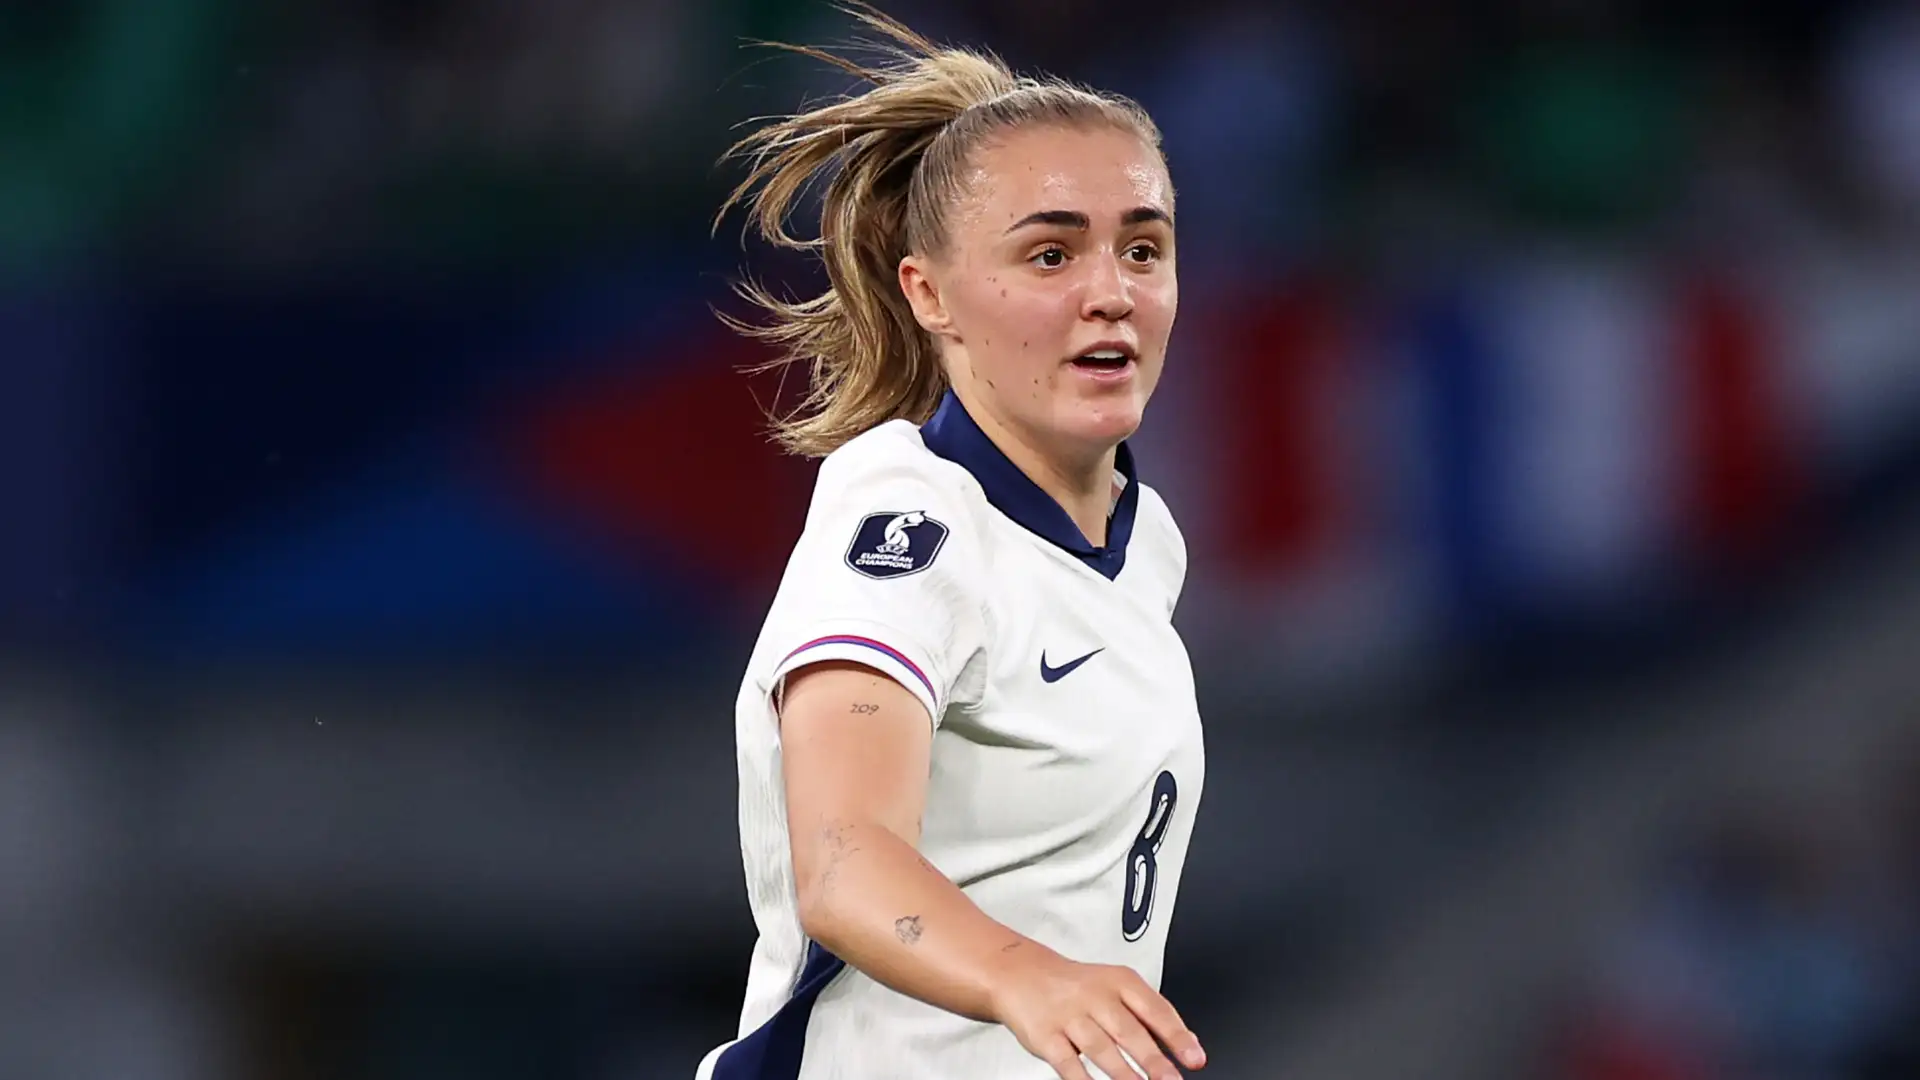 VIDEO: Georgia Stanway, what a hit! Lionesses star scores stunning opener in crucial Euro 2025 qualifier against France